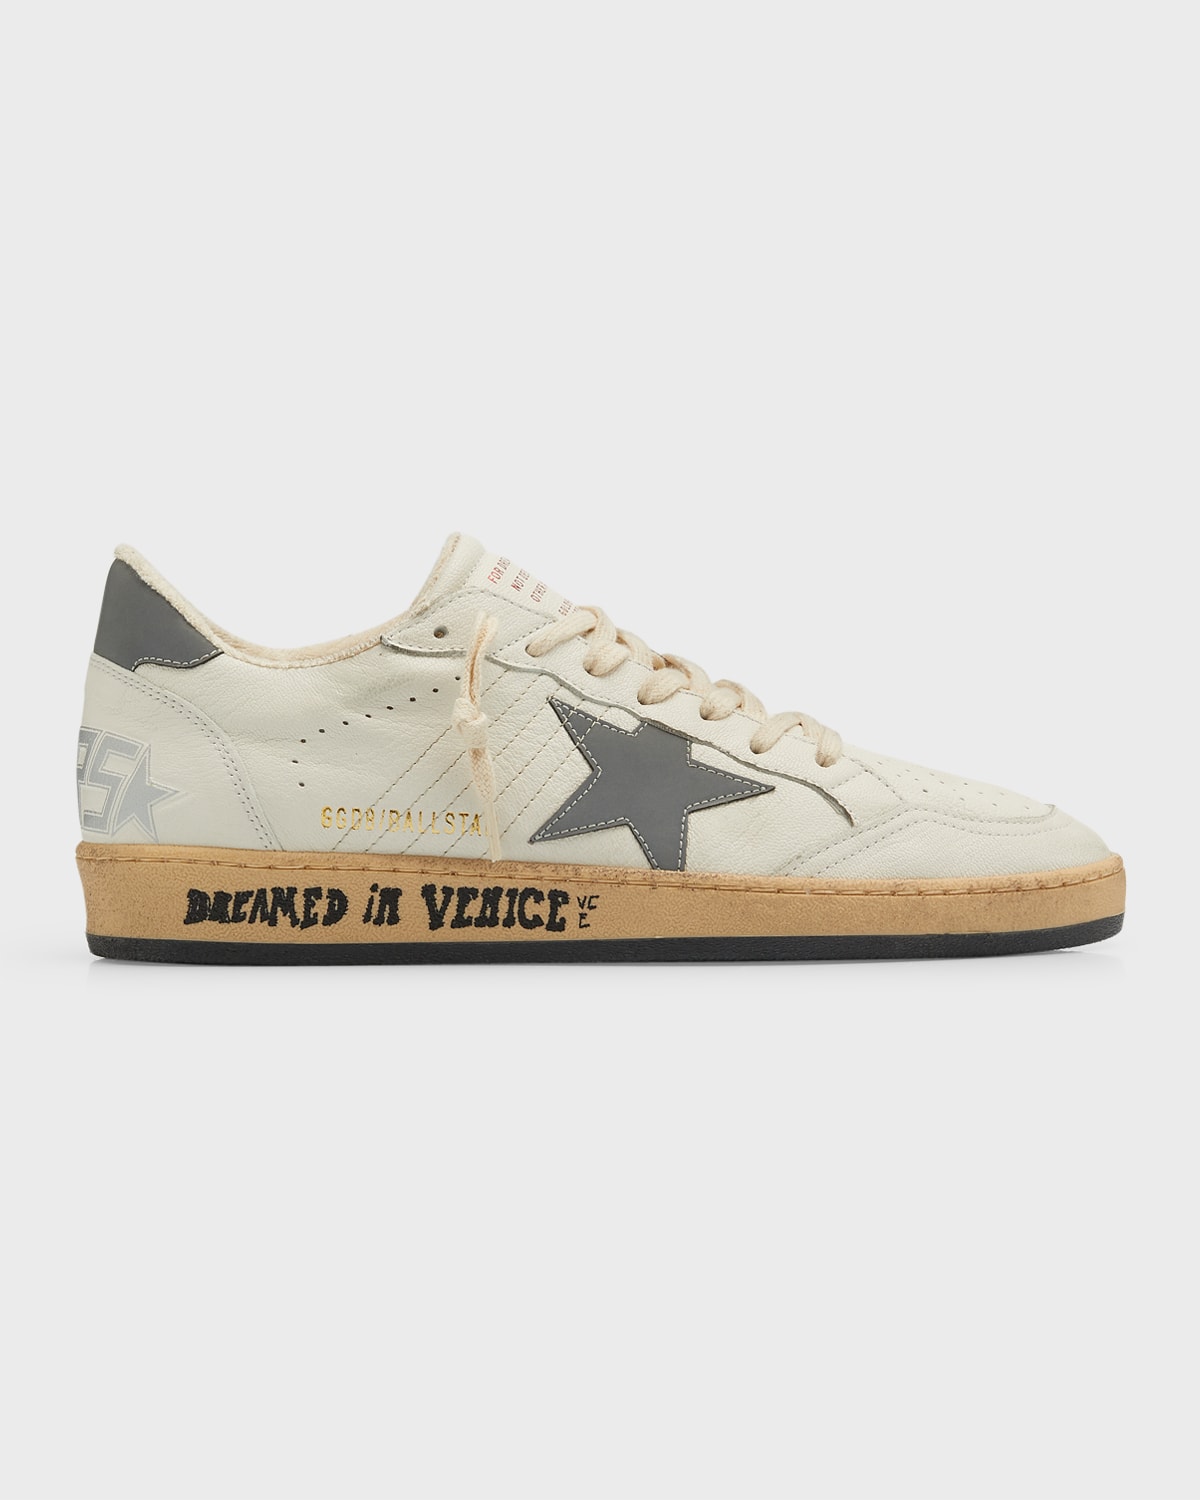 Golden Goose Men's Ball Star Leather Low-top Sneakers In White/grey